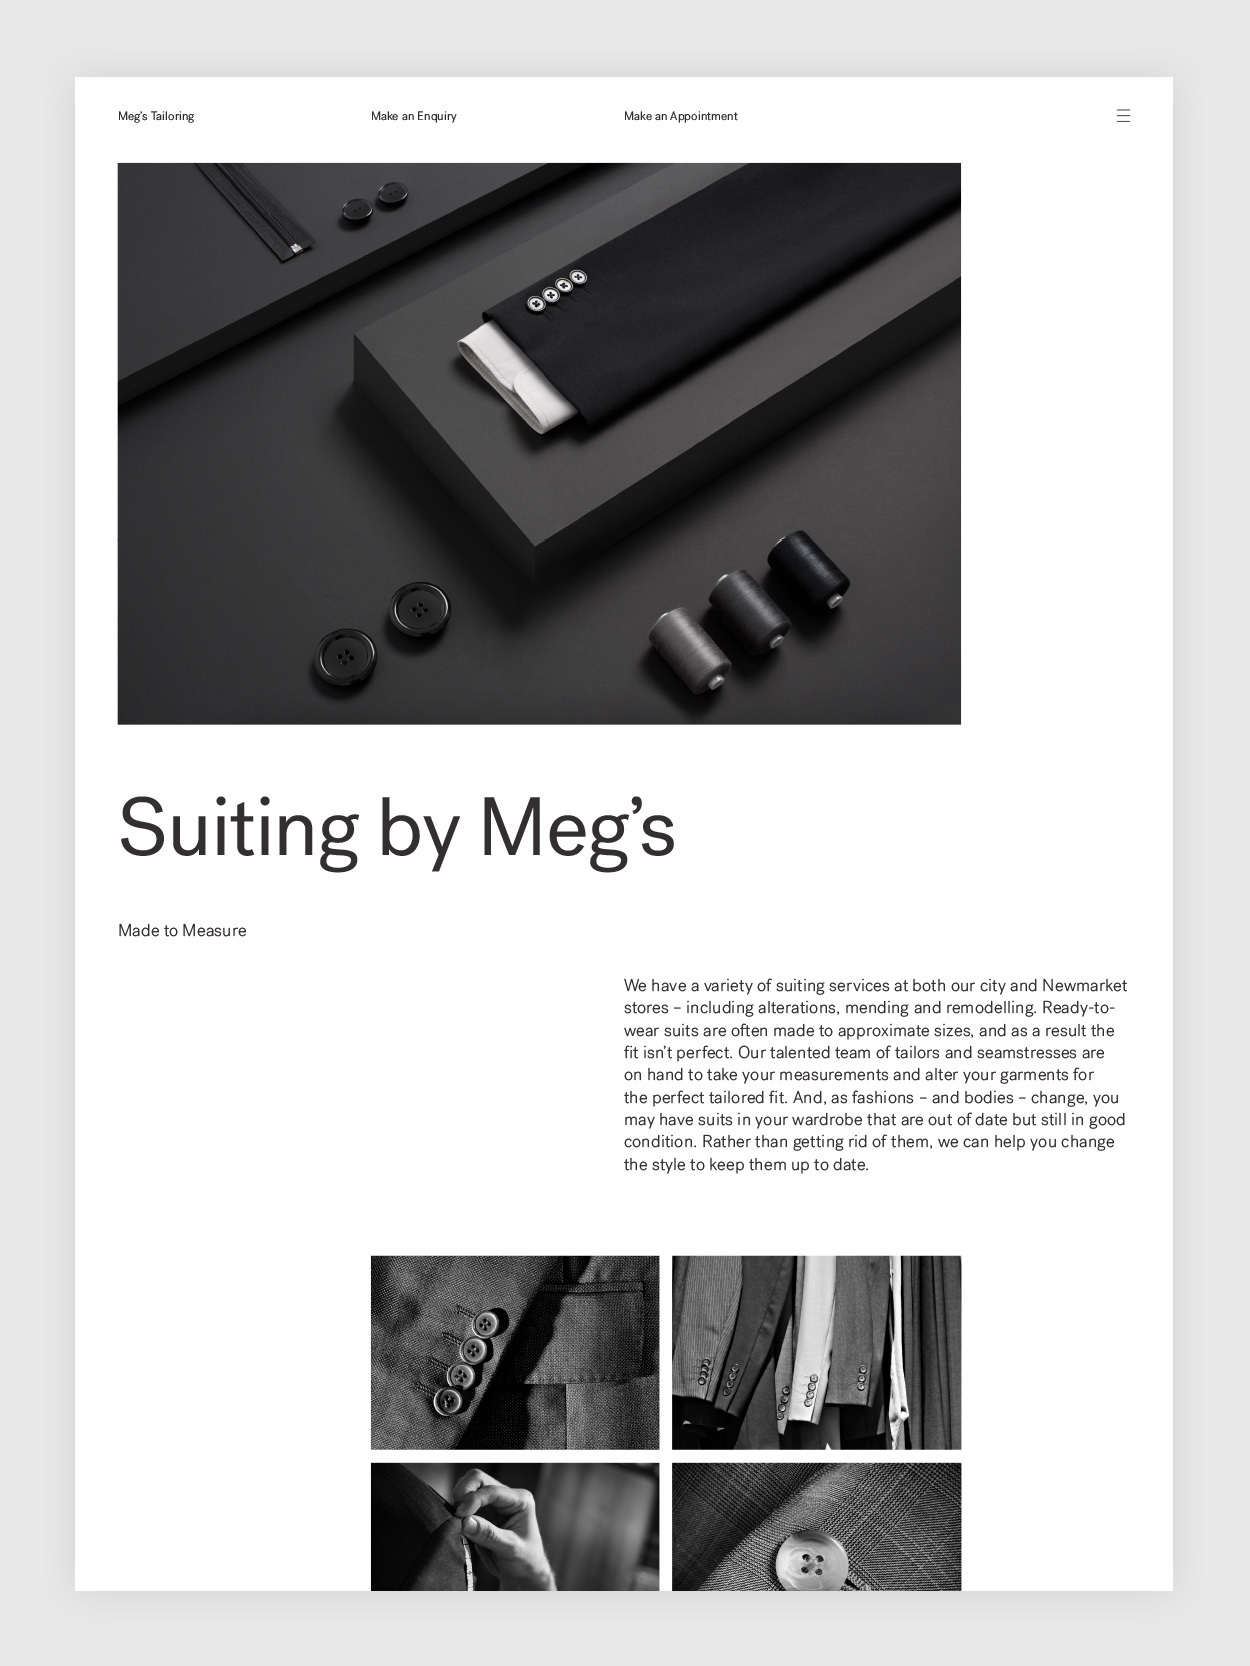 Brand identity and website by Auckland-based Studio South for New Zealand tailoring service Meg's